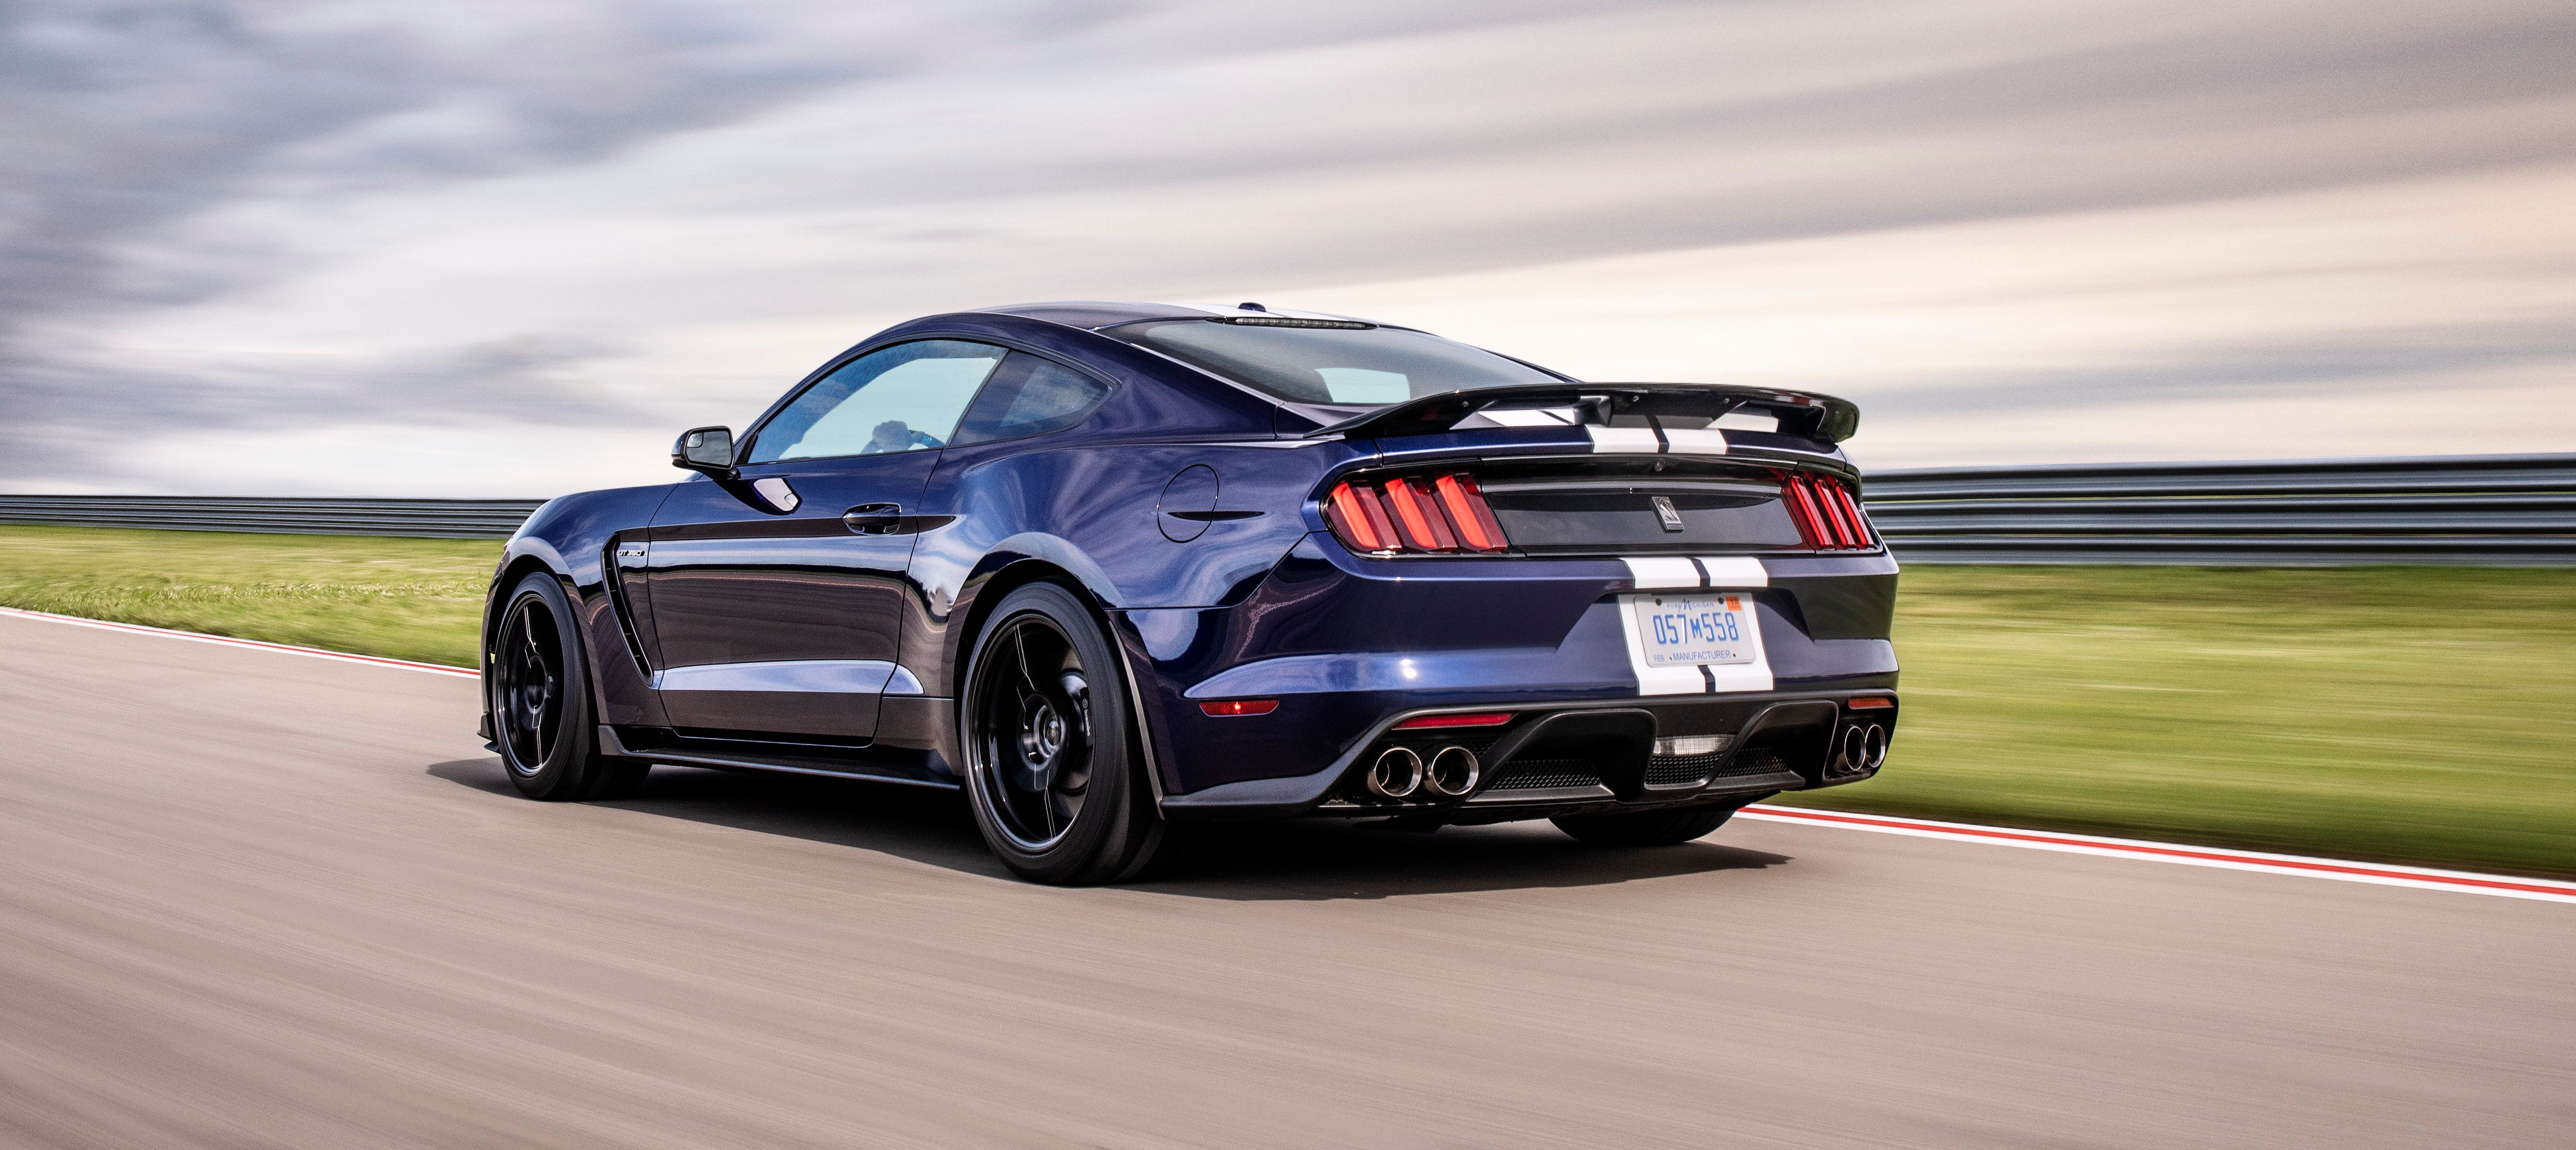 Shelby GT350 on track.